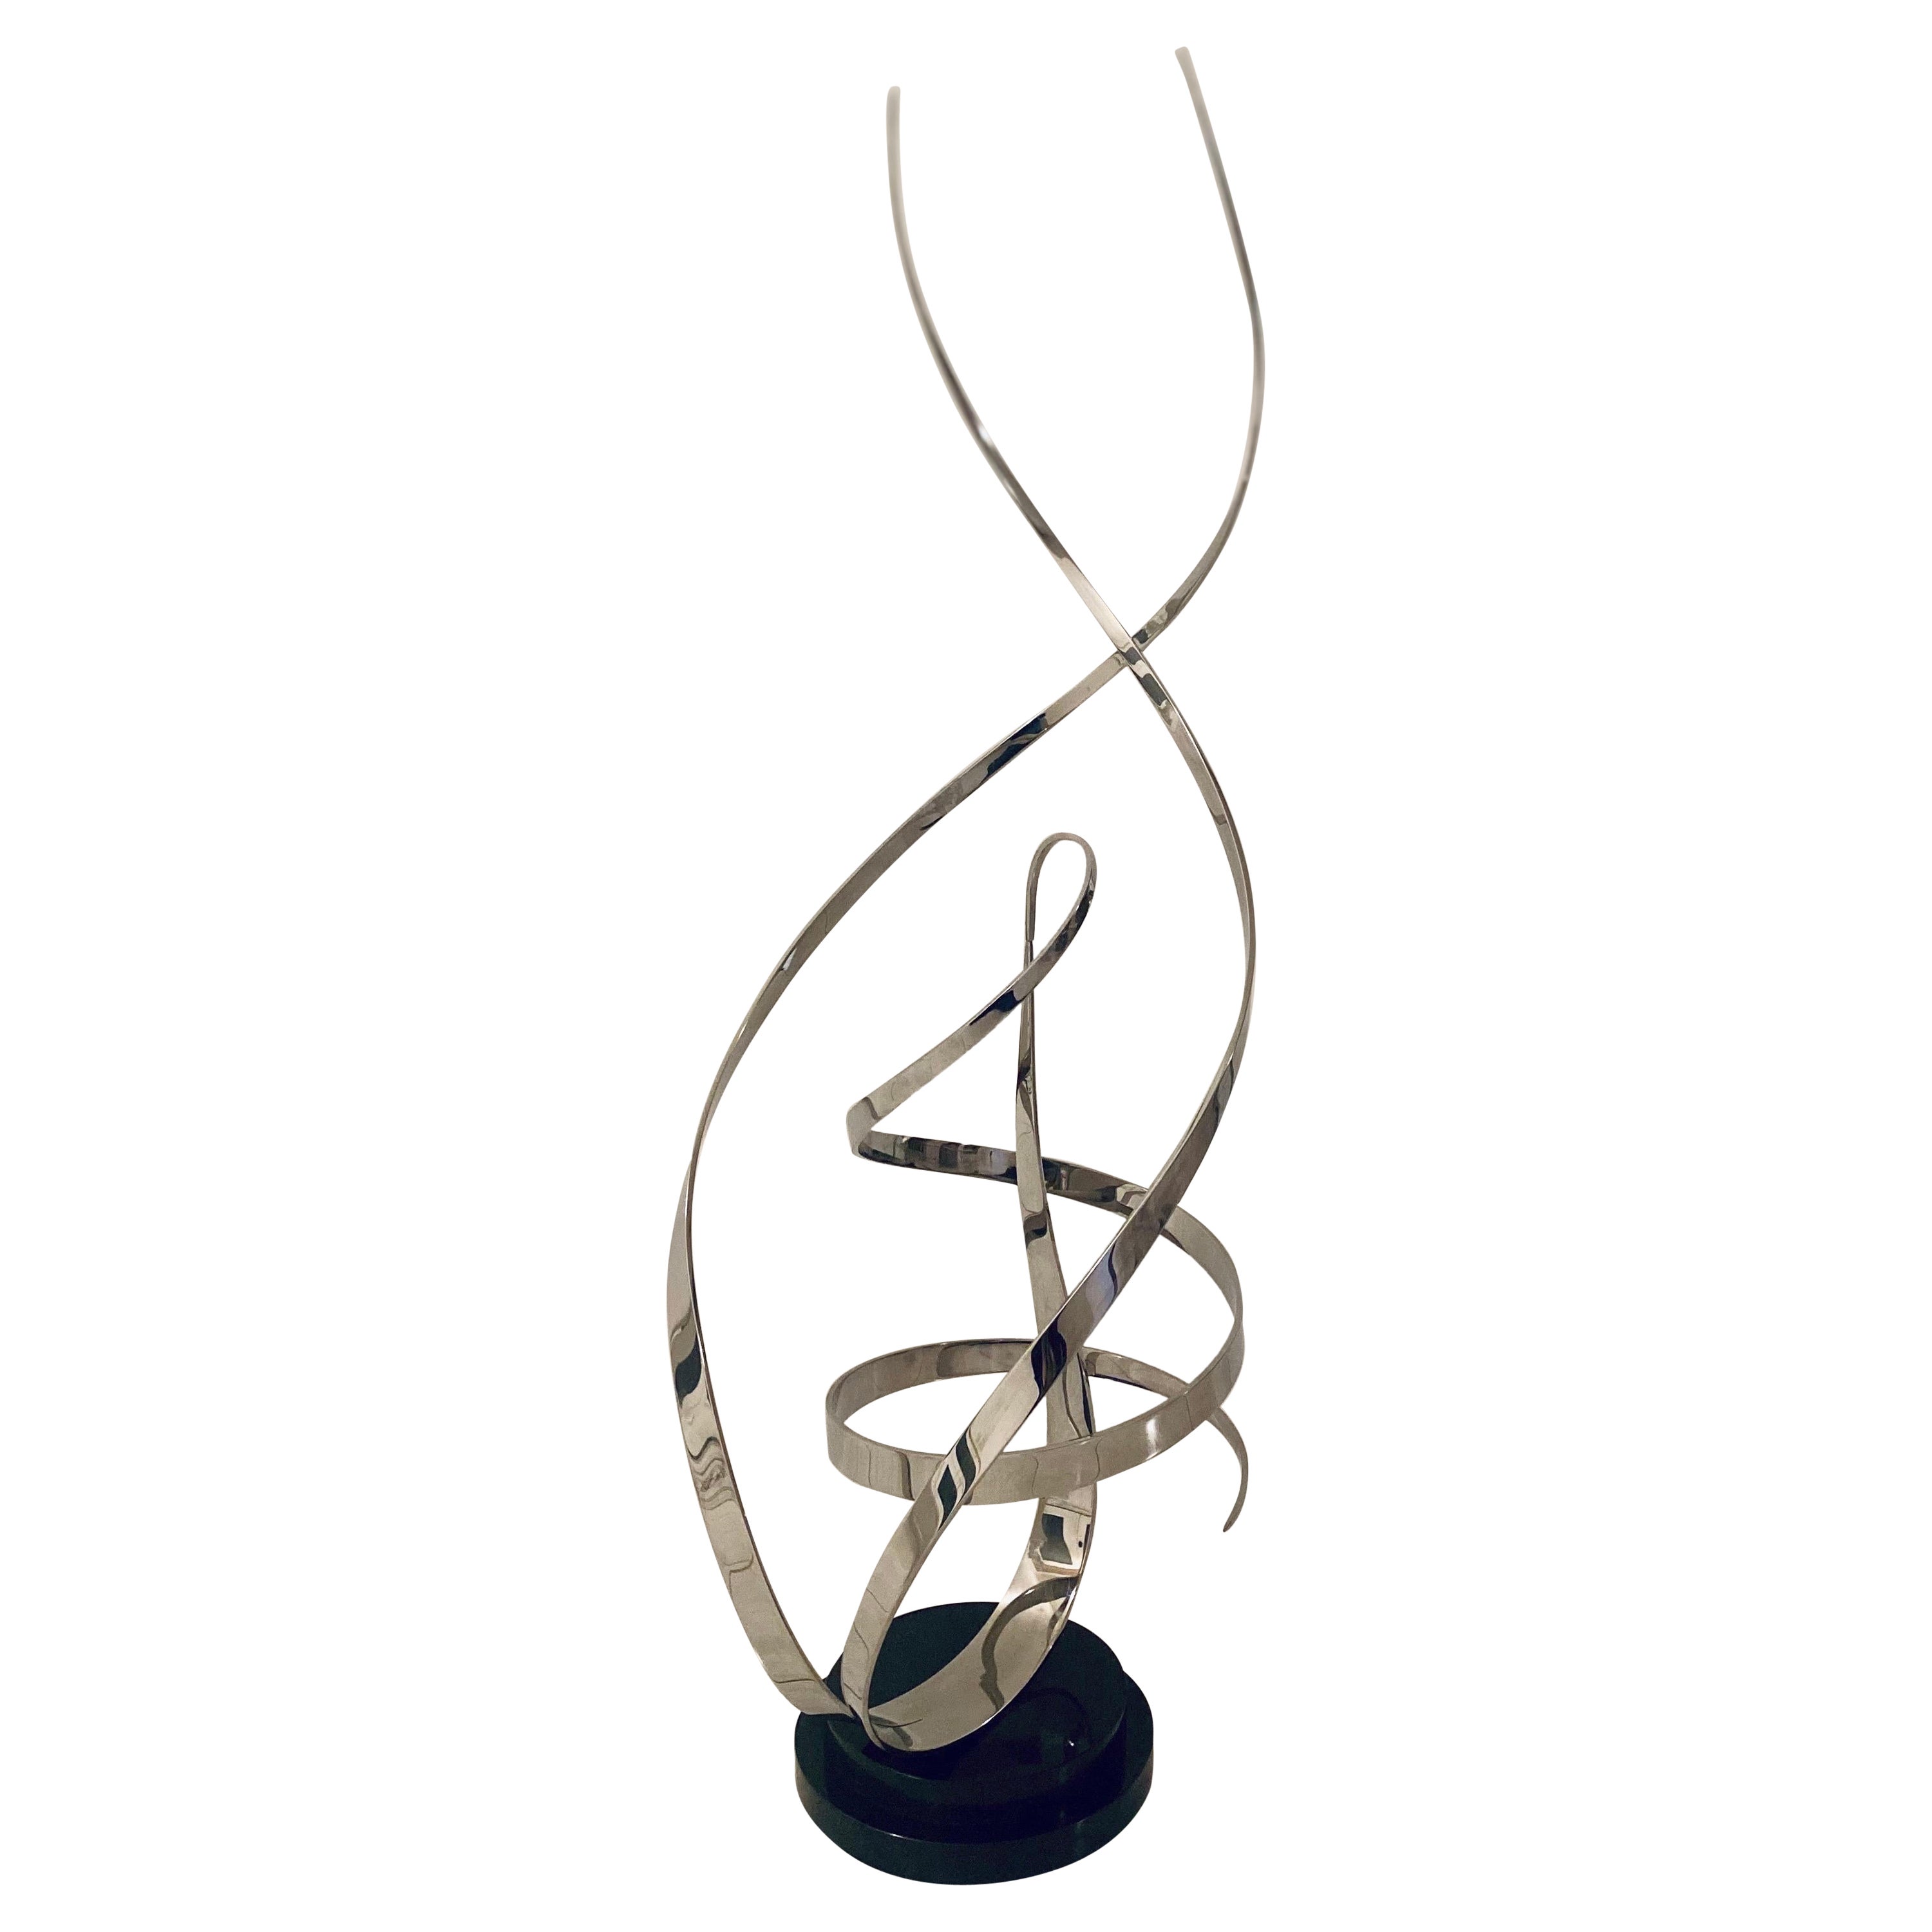 George Beckmann Kinetic Stainless Steel Sculpture For Sale at 1stDibs